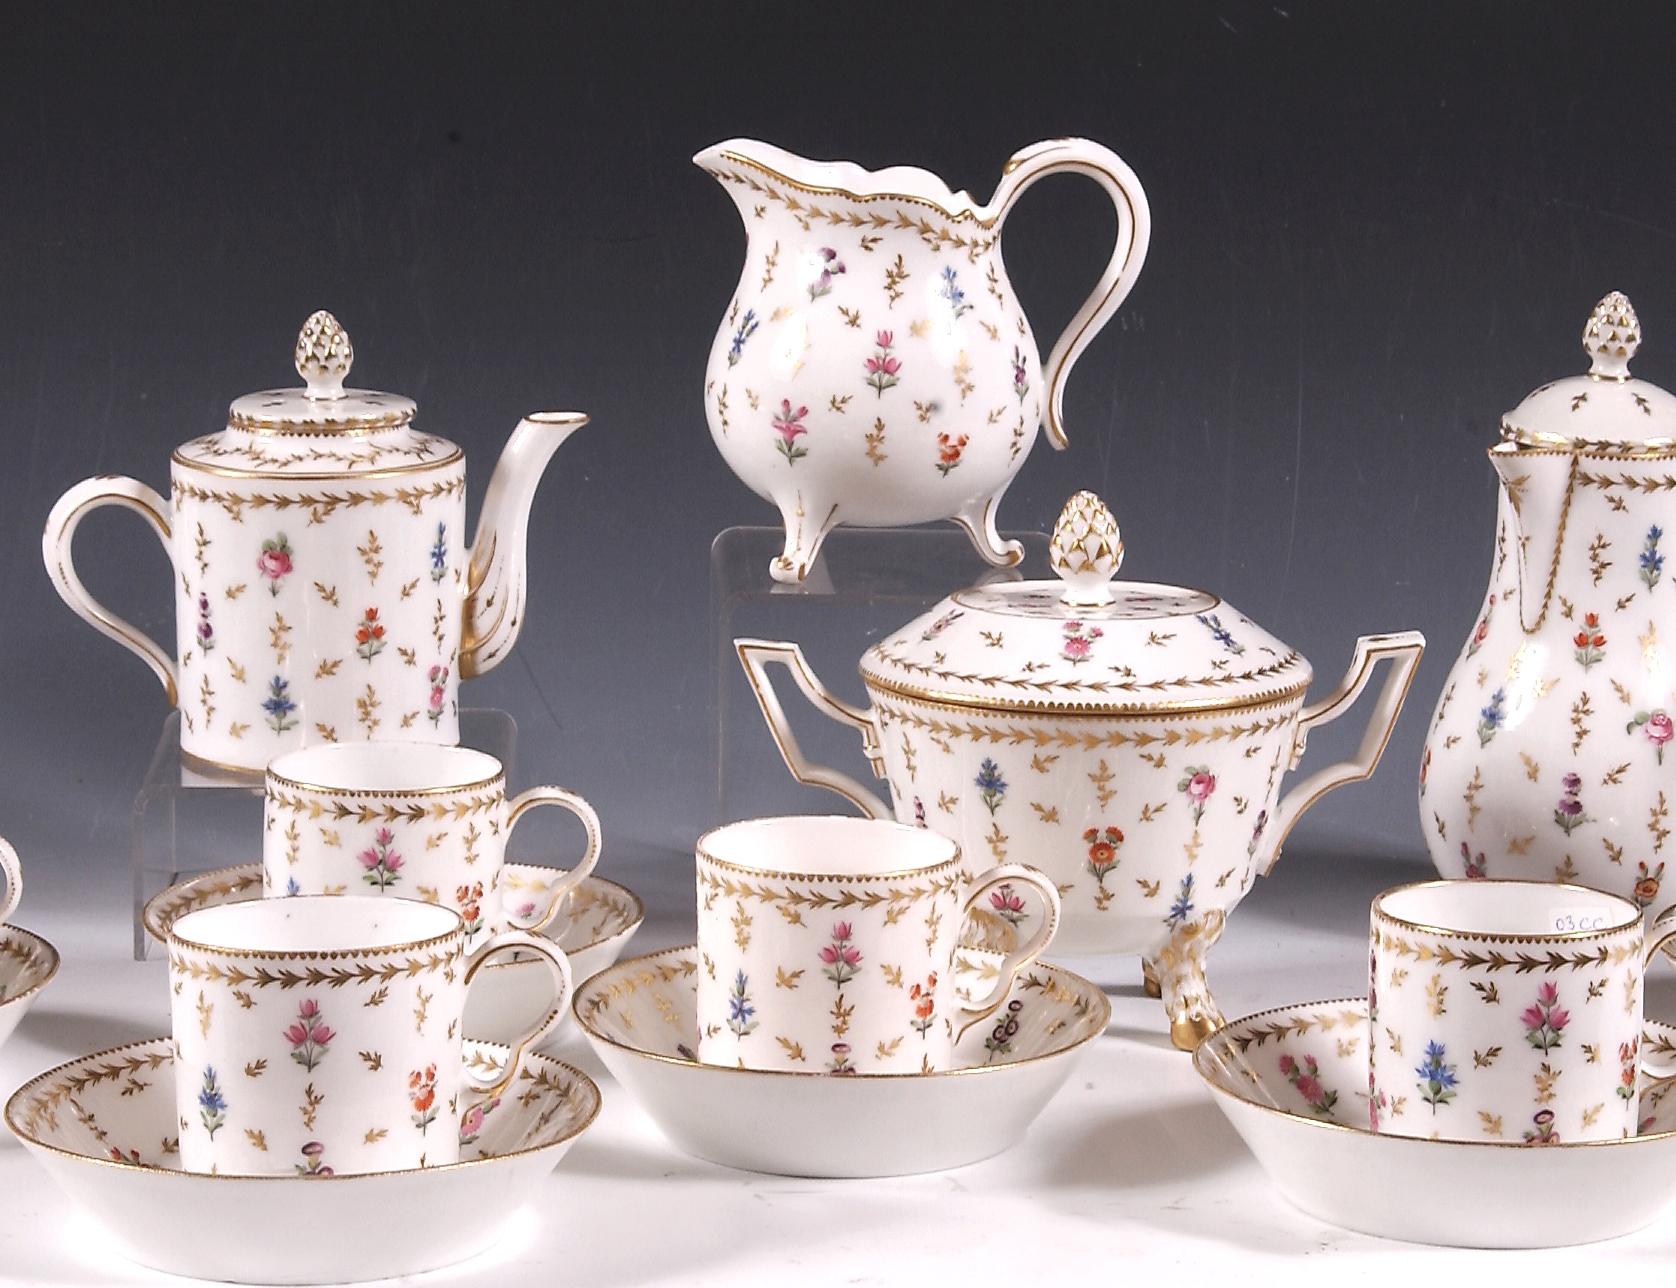 Hard porcelain service consisting of a teapot, a chocolate maker, a sugar bowl, a milk jug, six cups and saucers.

This rare service with its delicate decoration comes out of the ovens of the Clignancourt factory. Created following the discovery